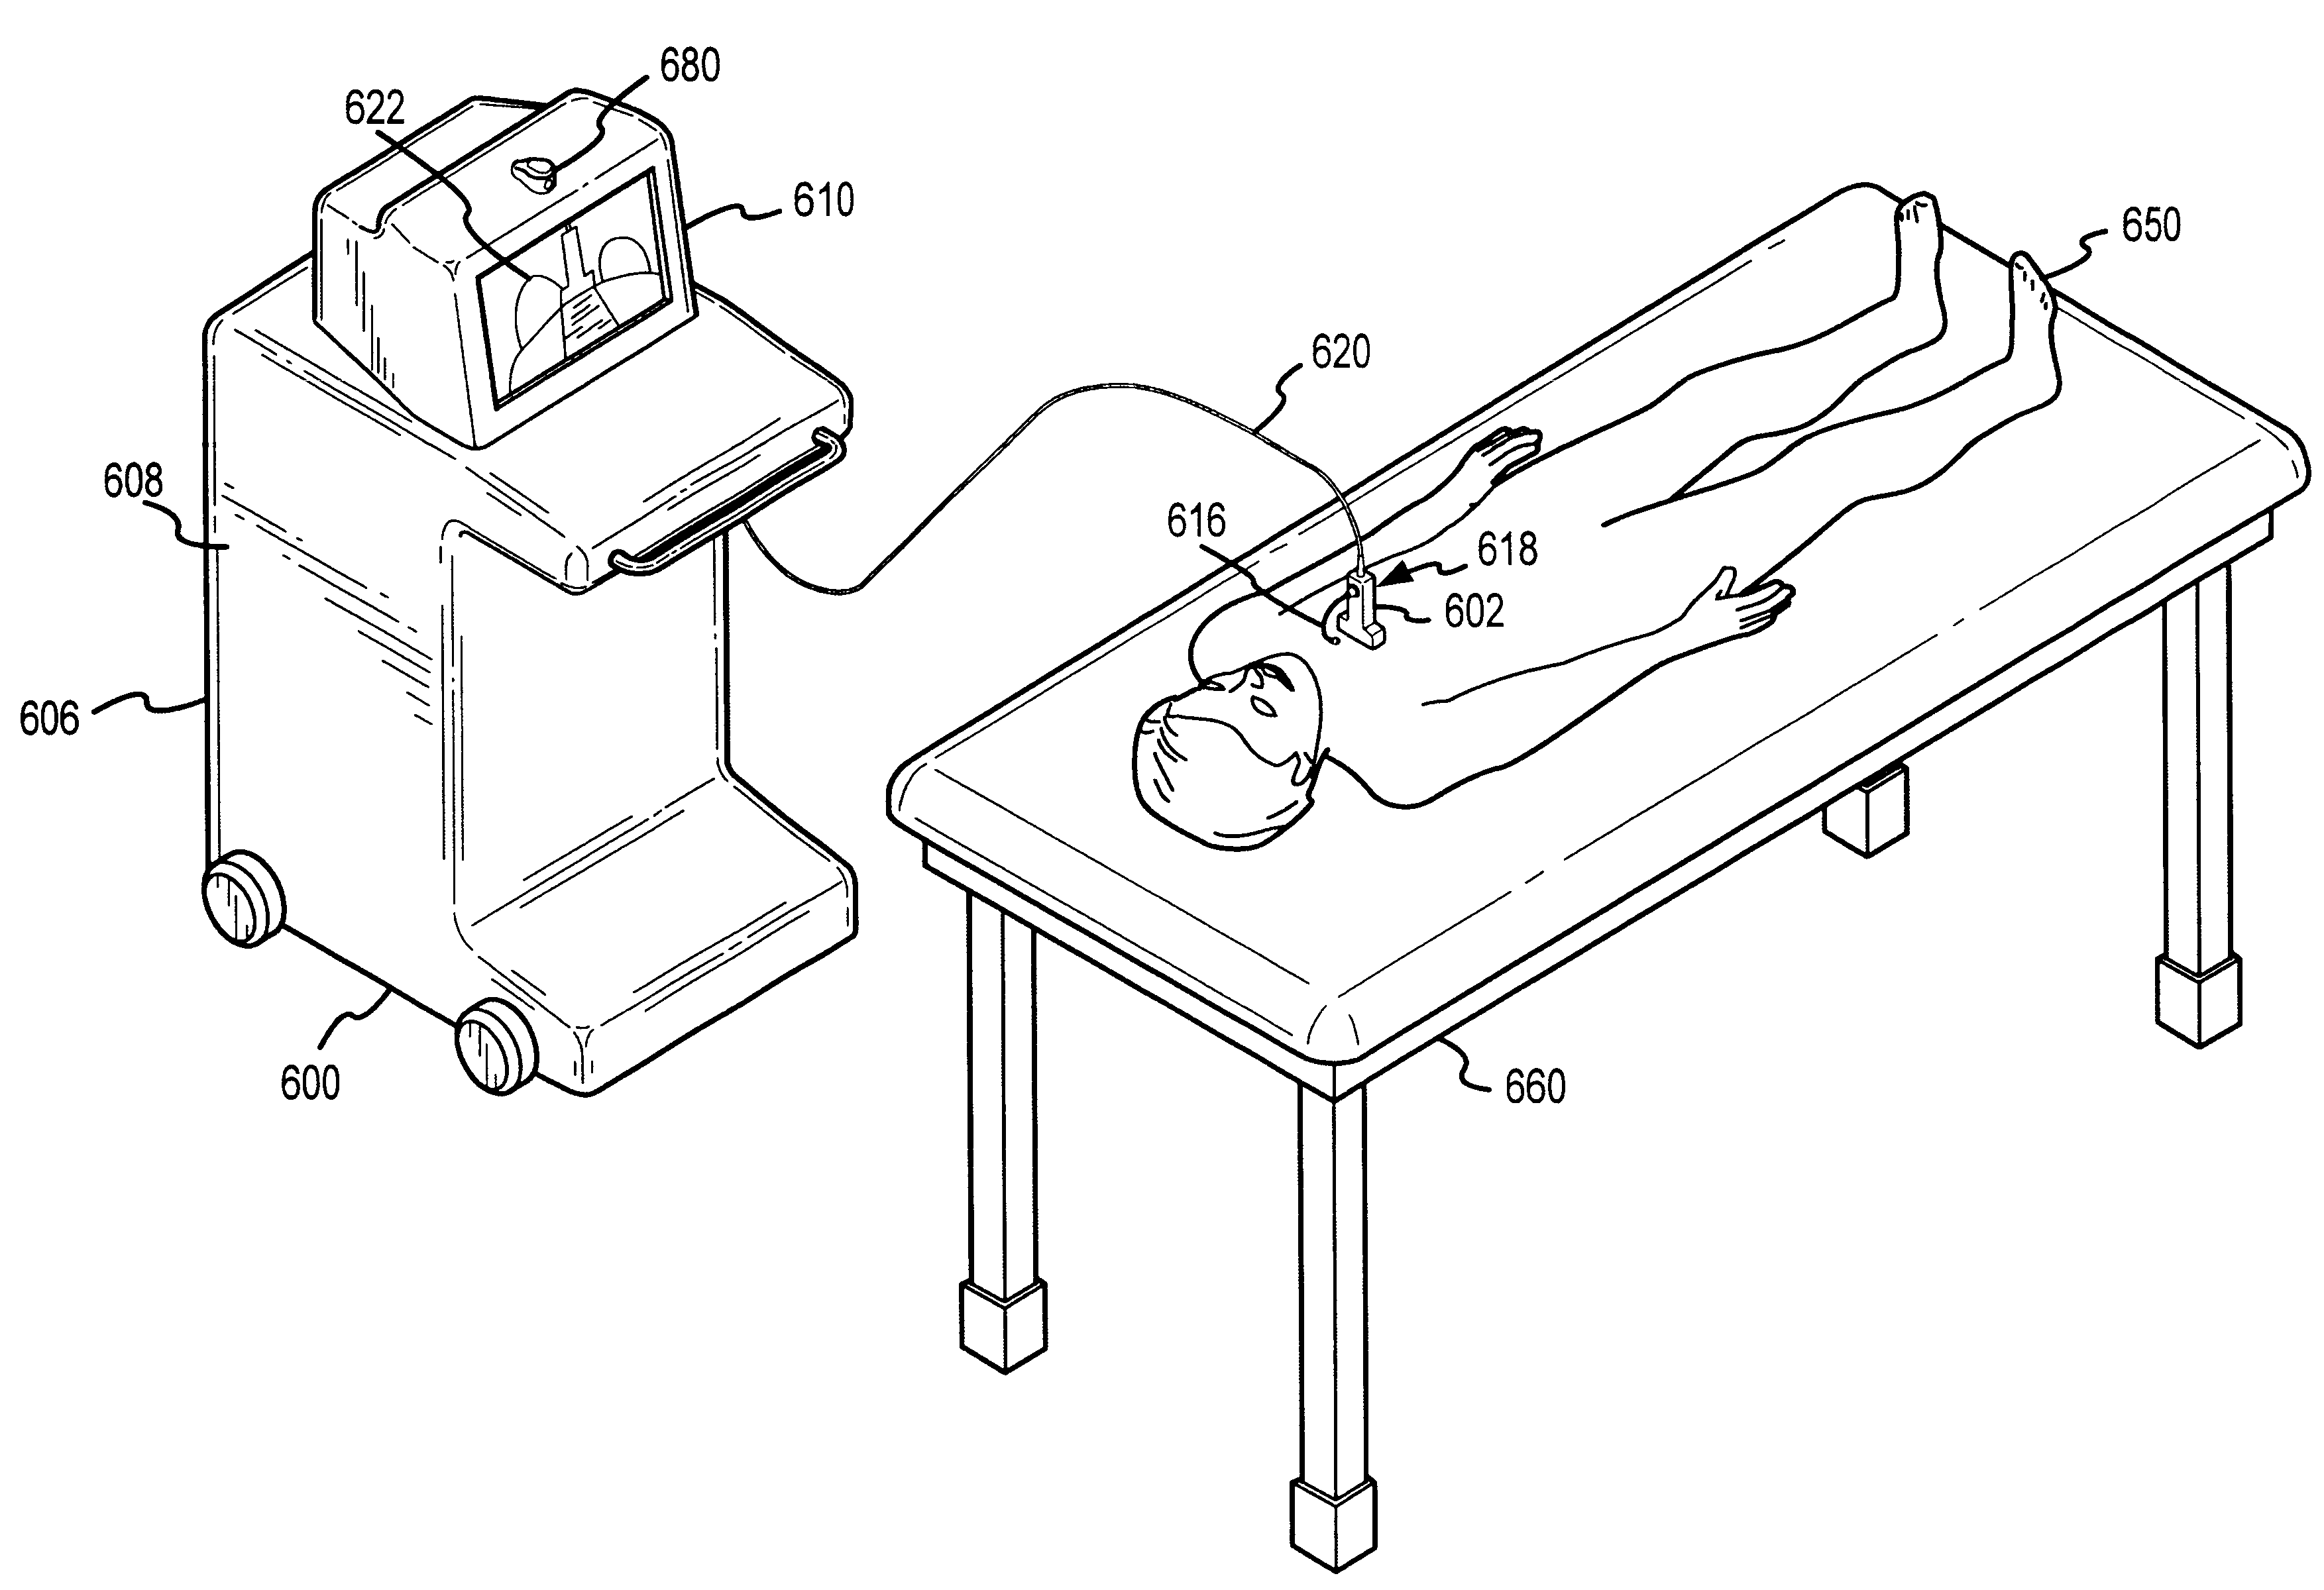 Visual imaging system for ultrasonic probe